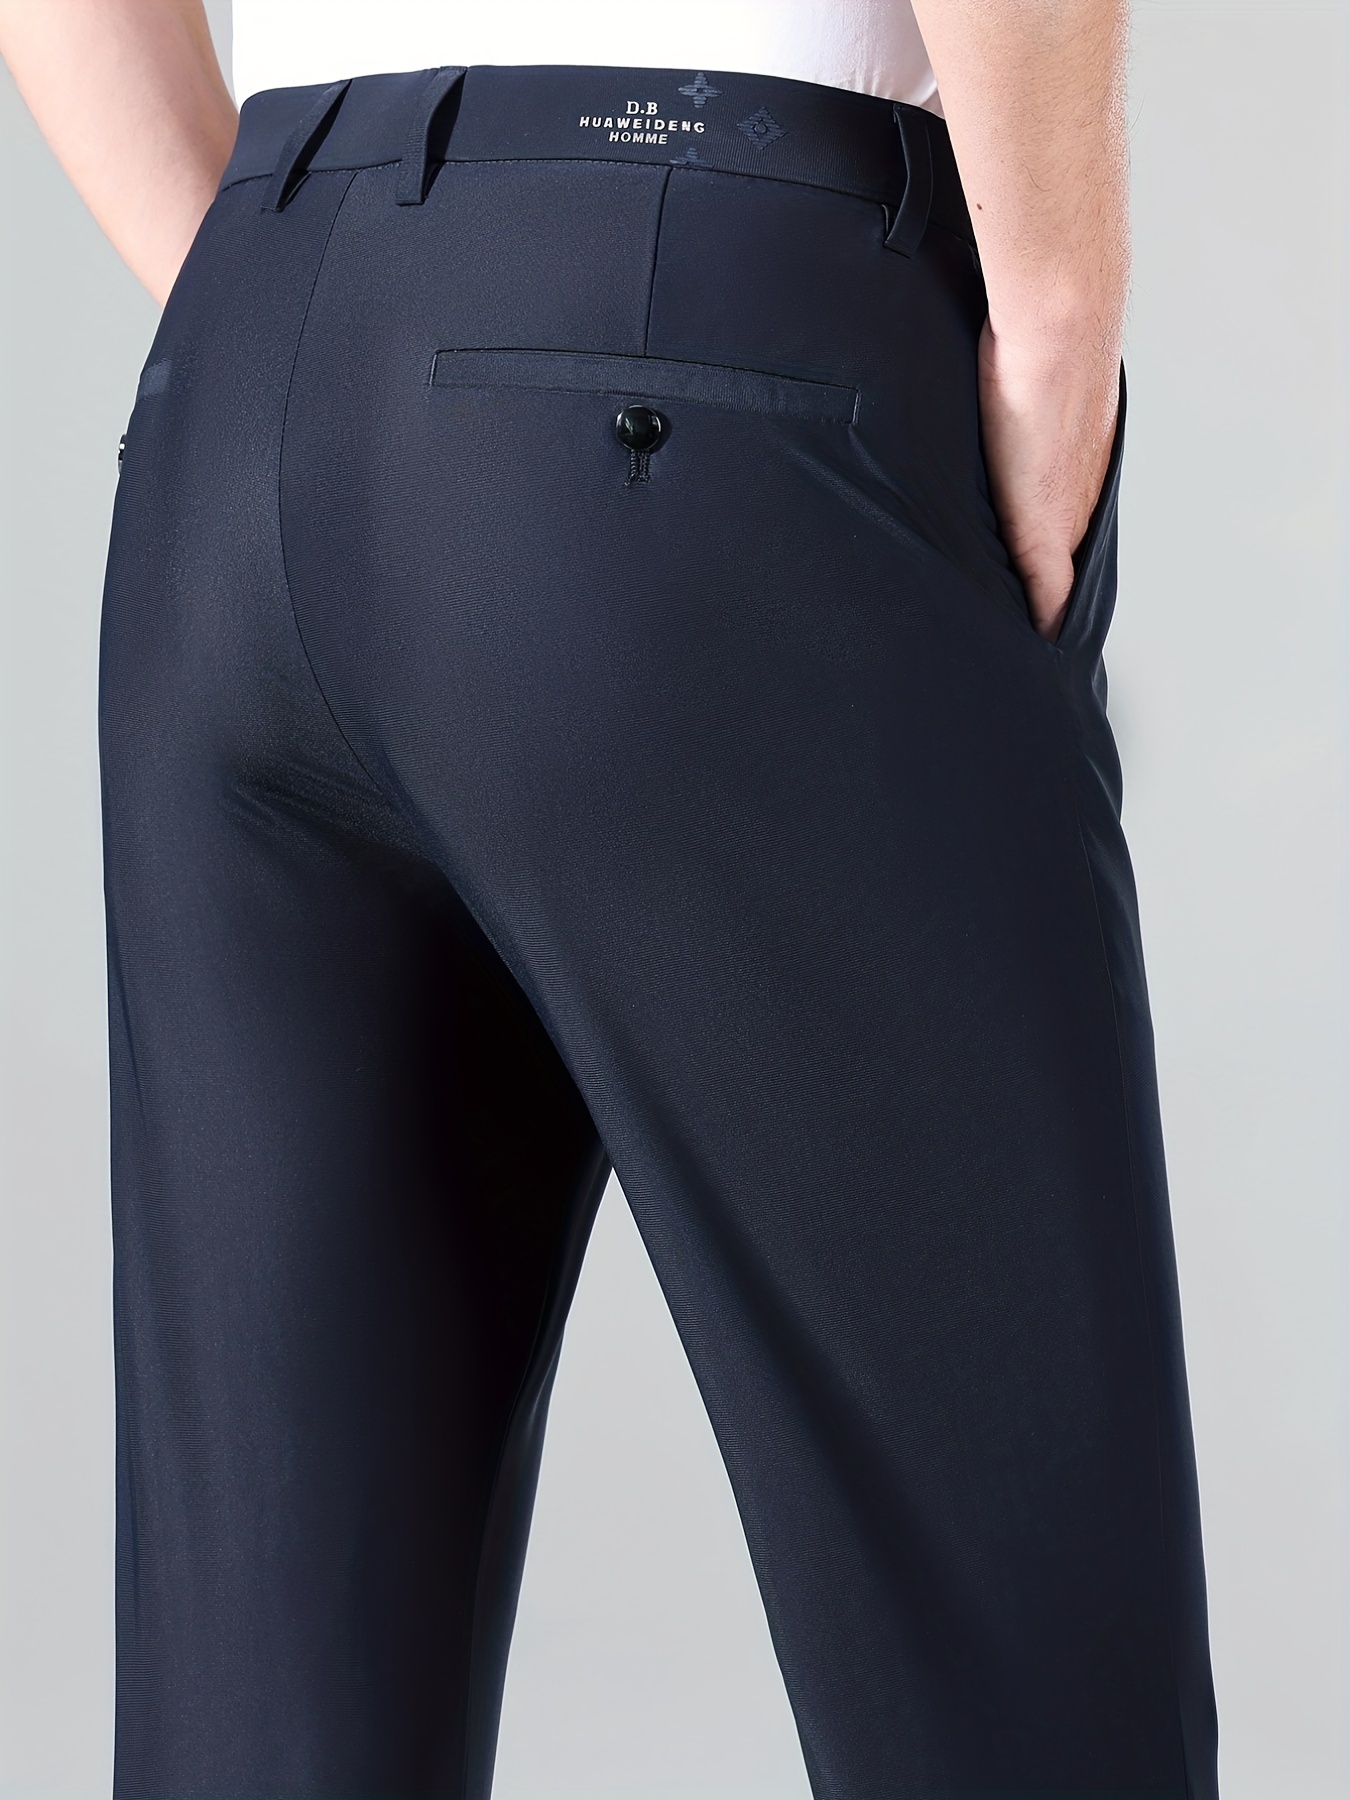 Stylish and Stretchable Lycra Trousers for Men